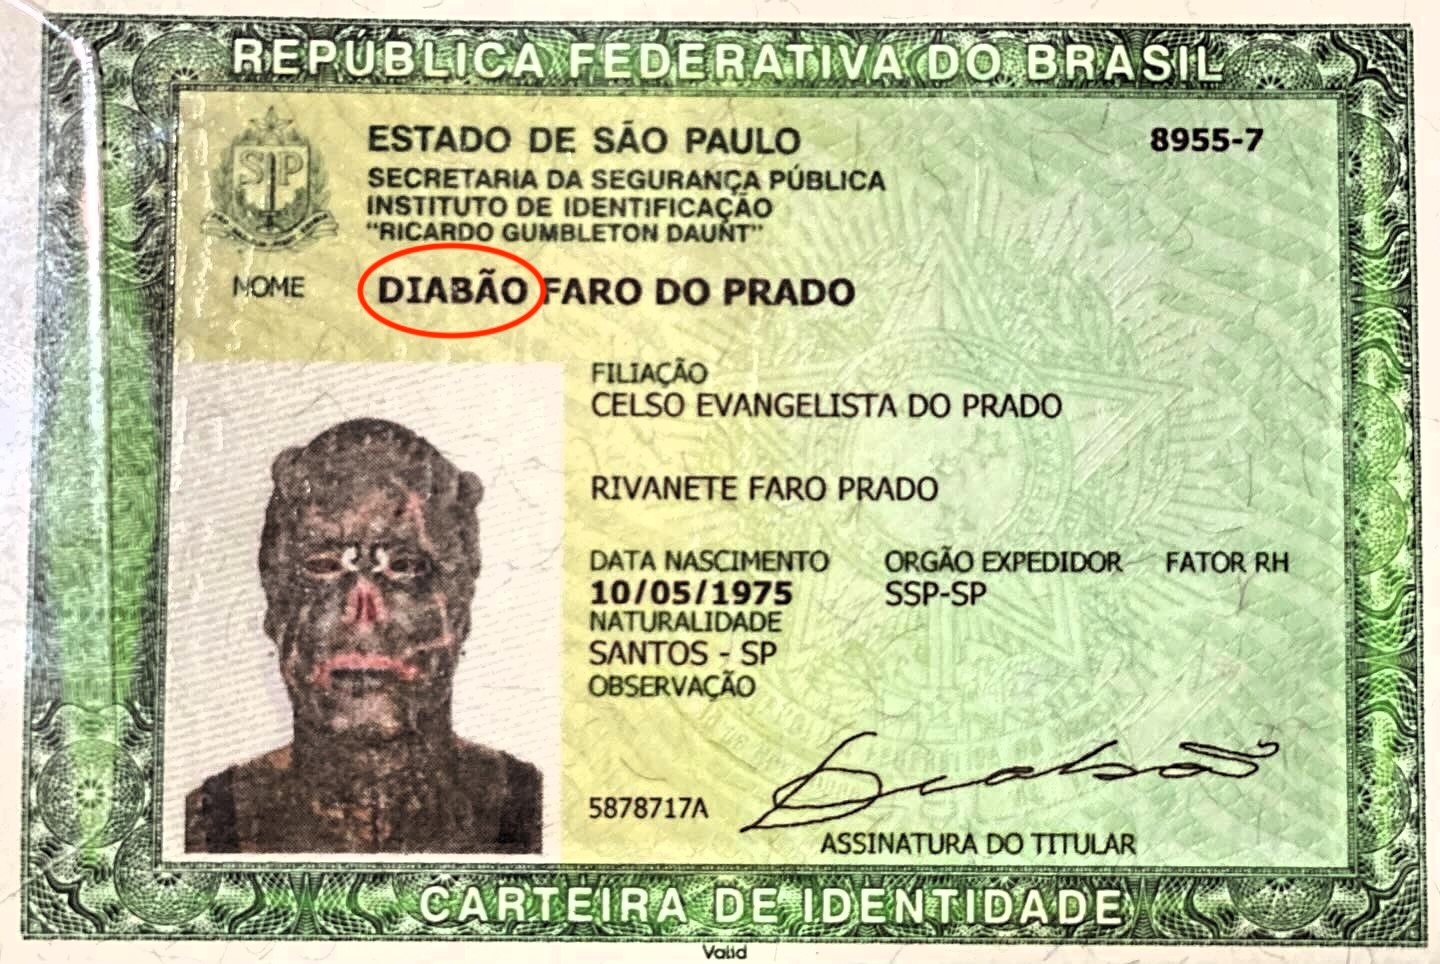 Body modification enthusiast Michel Faro do Prado, known as "Human Satan," receives a new passport with his Satanic name and altered image, showcasing his extreme transformations.